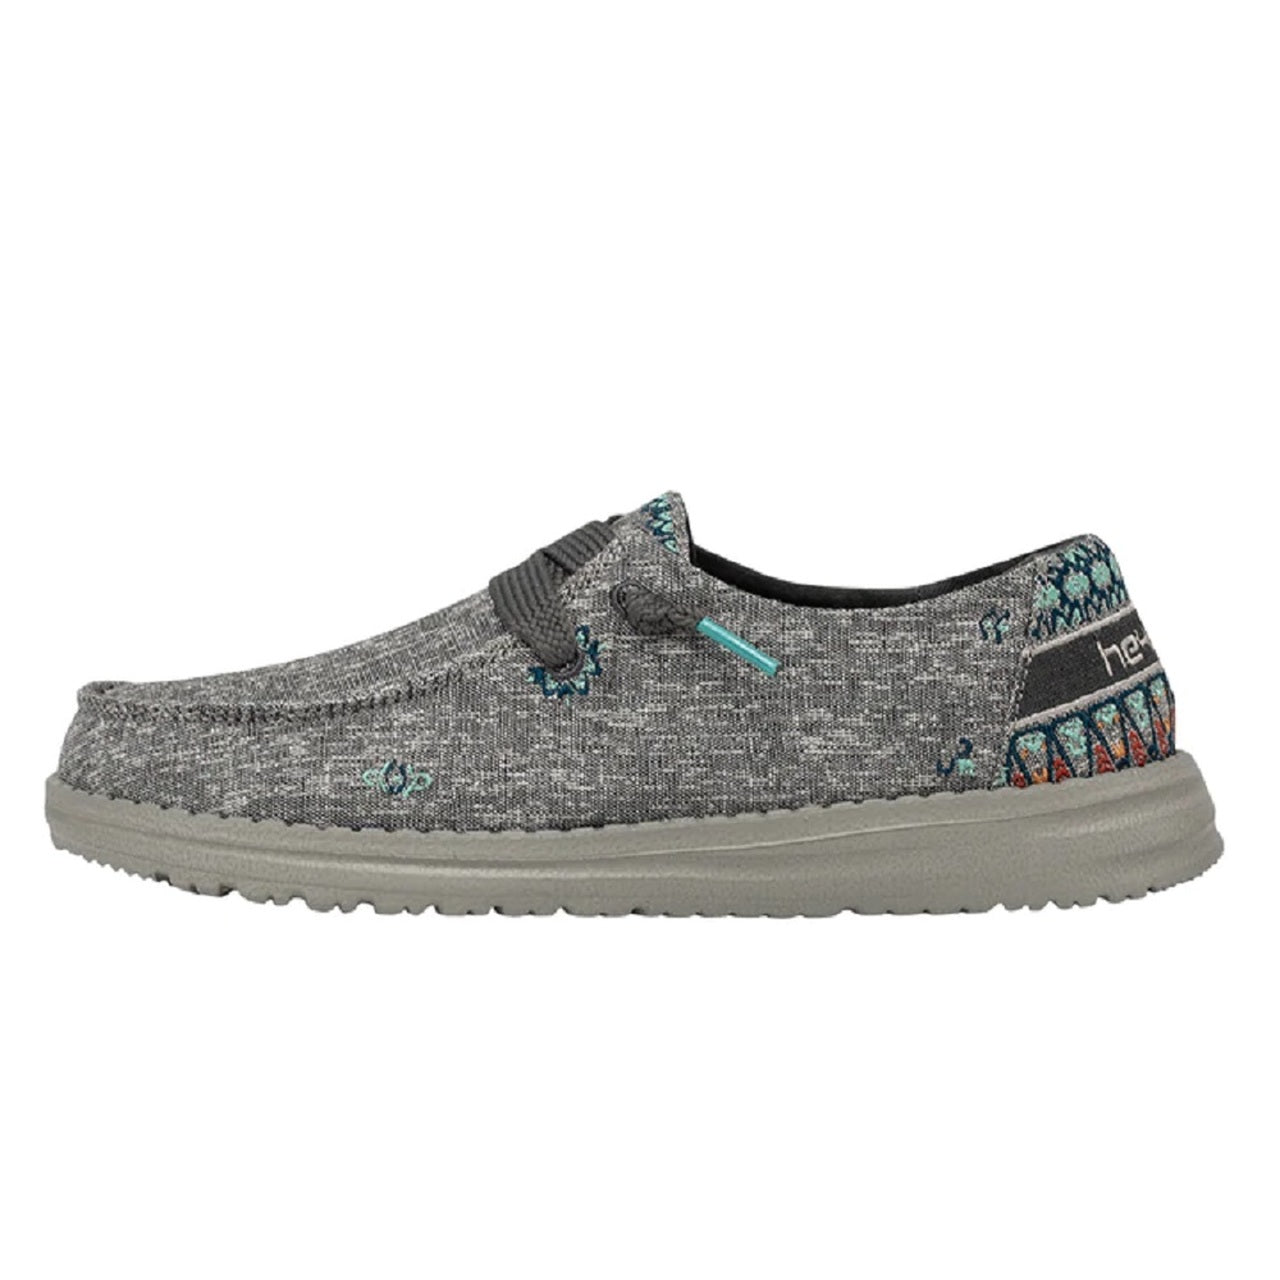 Plantar fasciitis running shoes - Hey Dude Wendy Chambray Woven